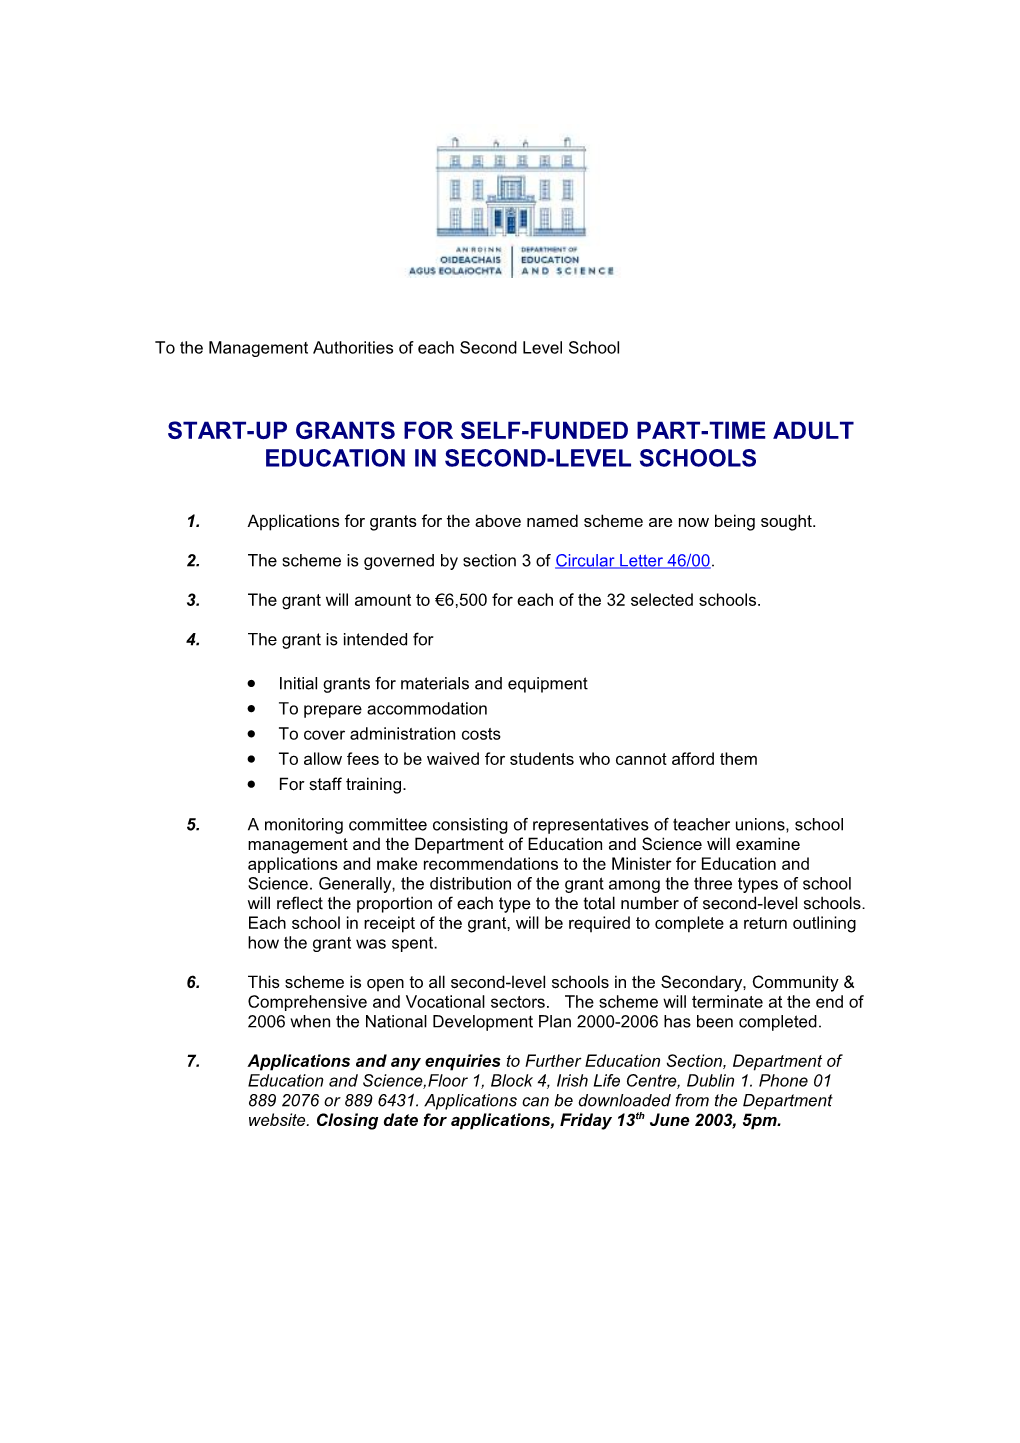 Start-Up Grants for Self-Funded Part-Time Adult Education in Second-Level Schools (File